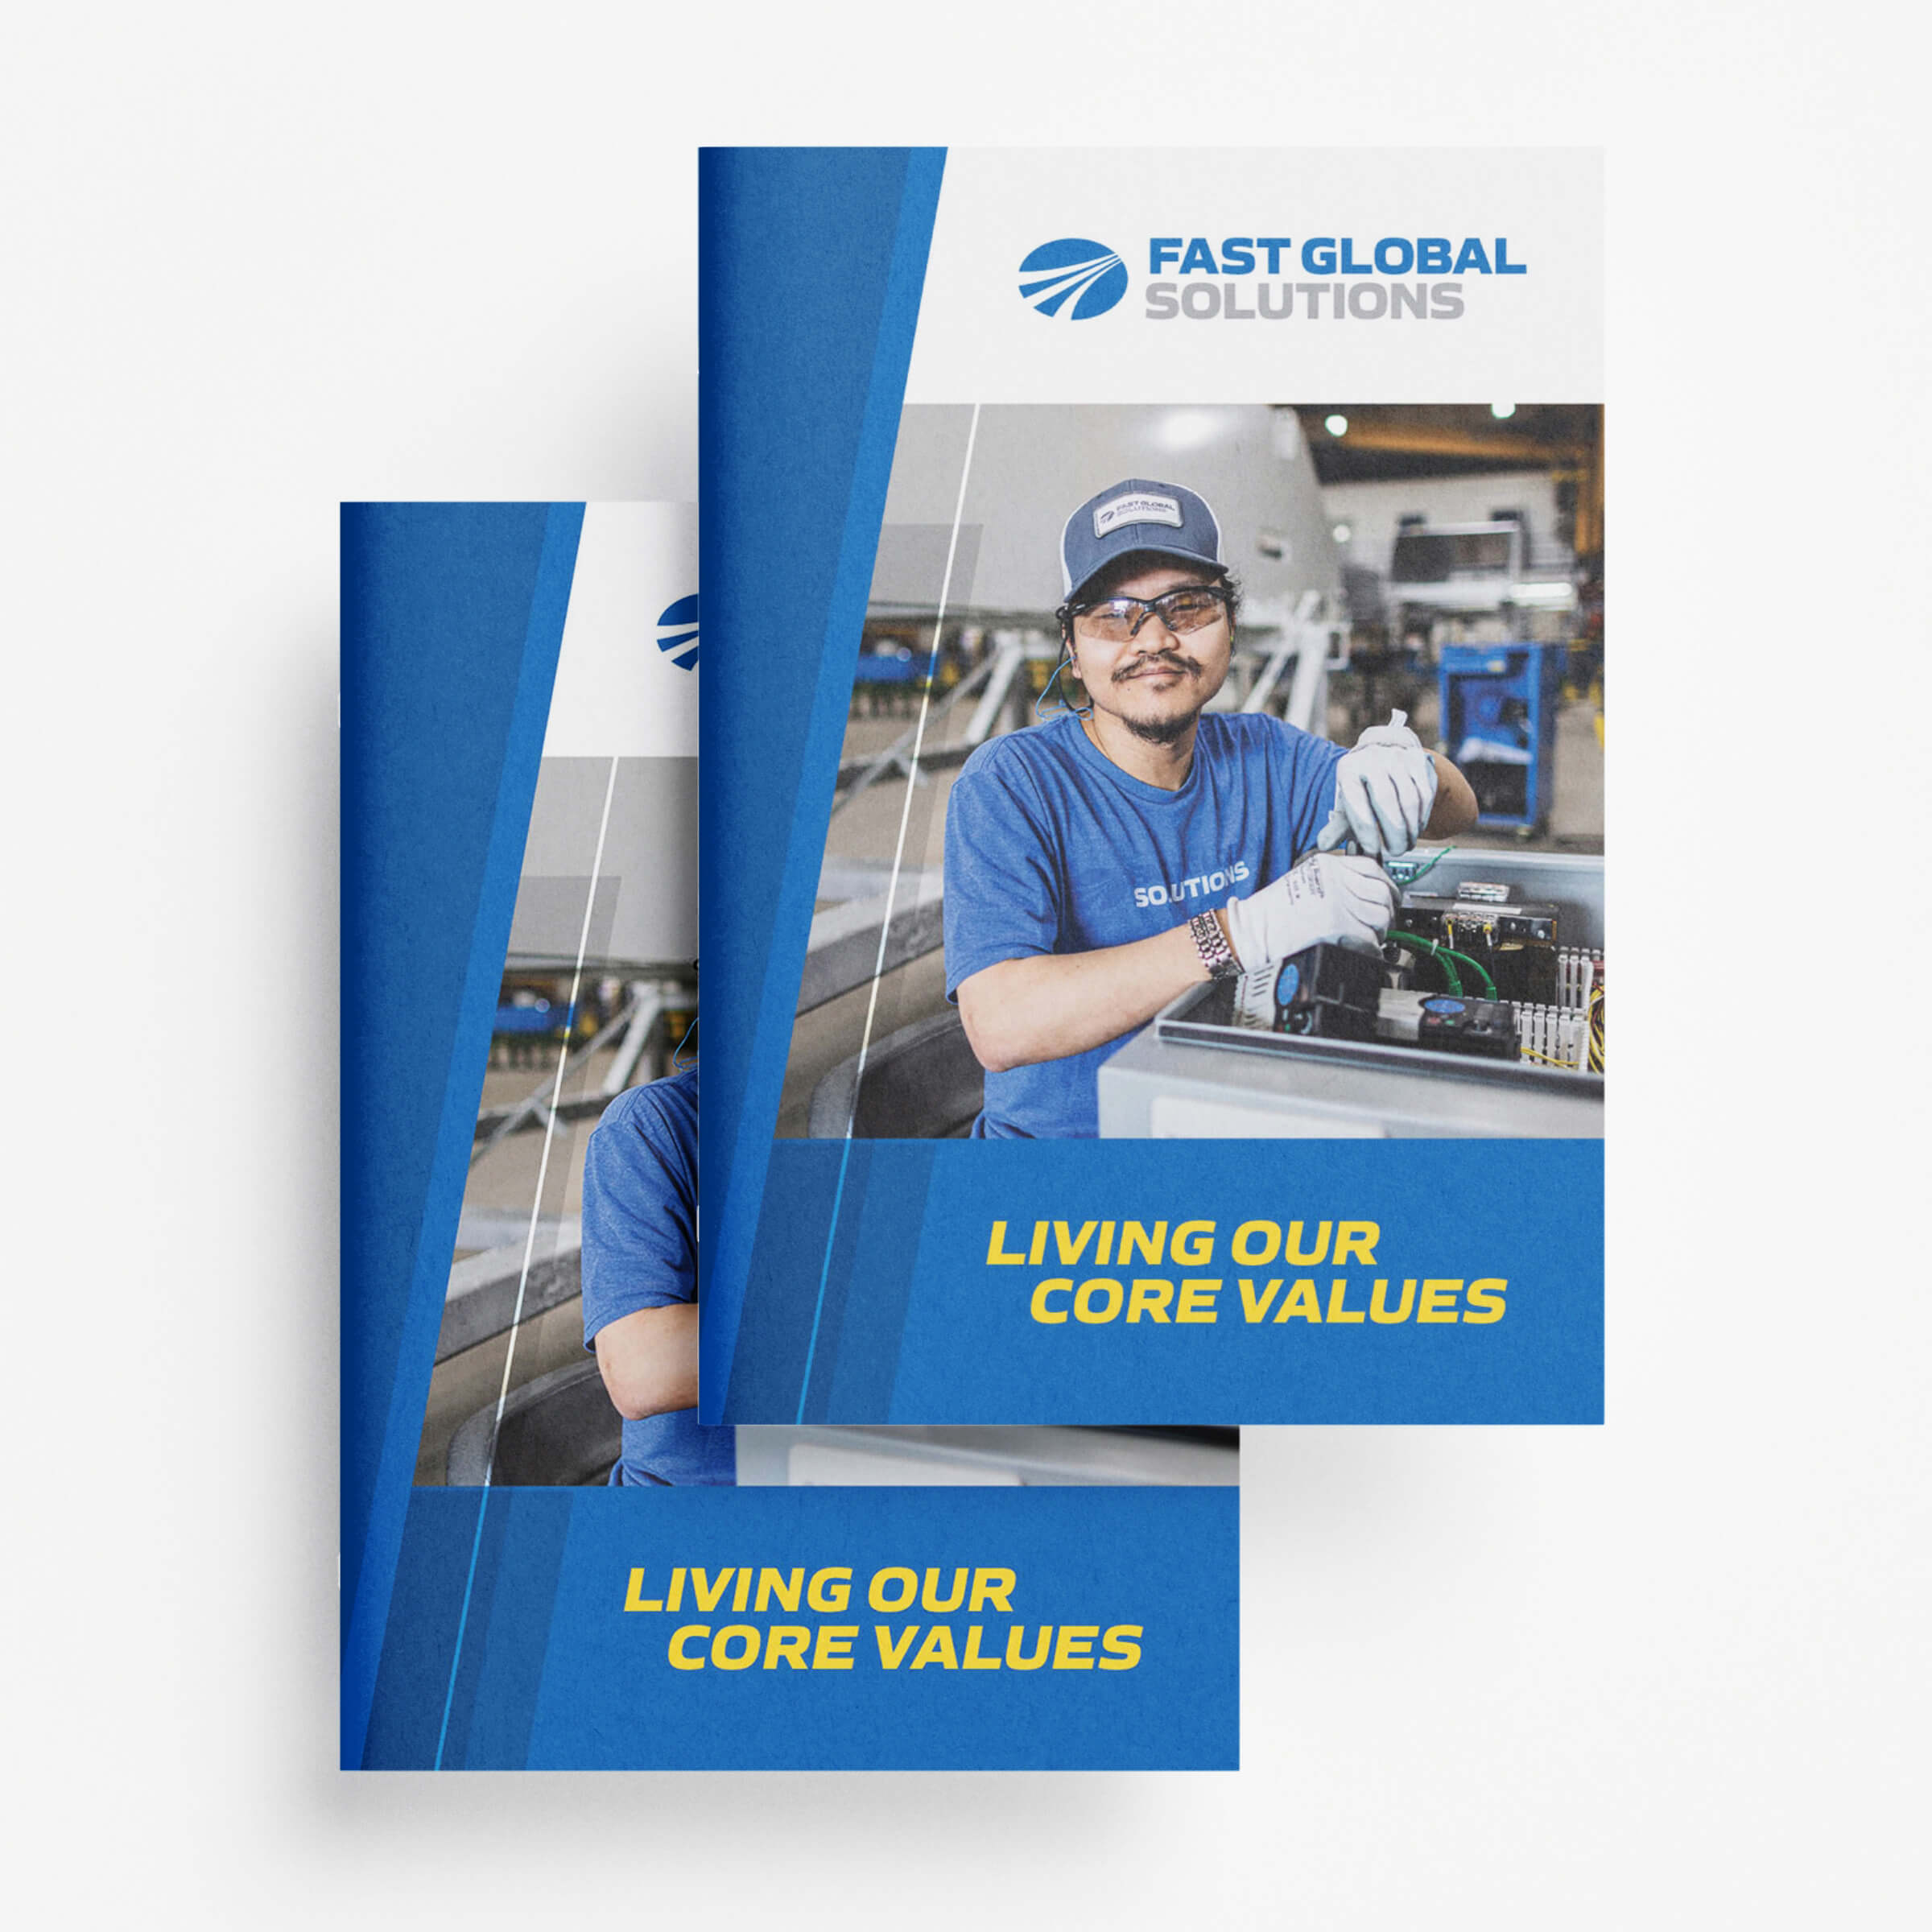 The brochure cover featuring an employee photo.